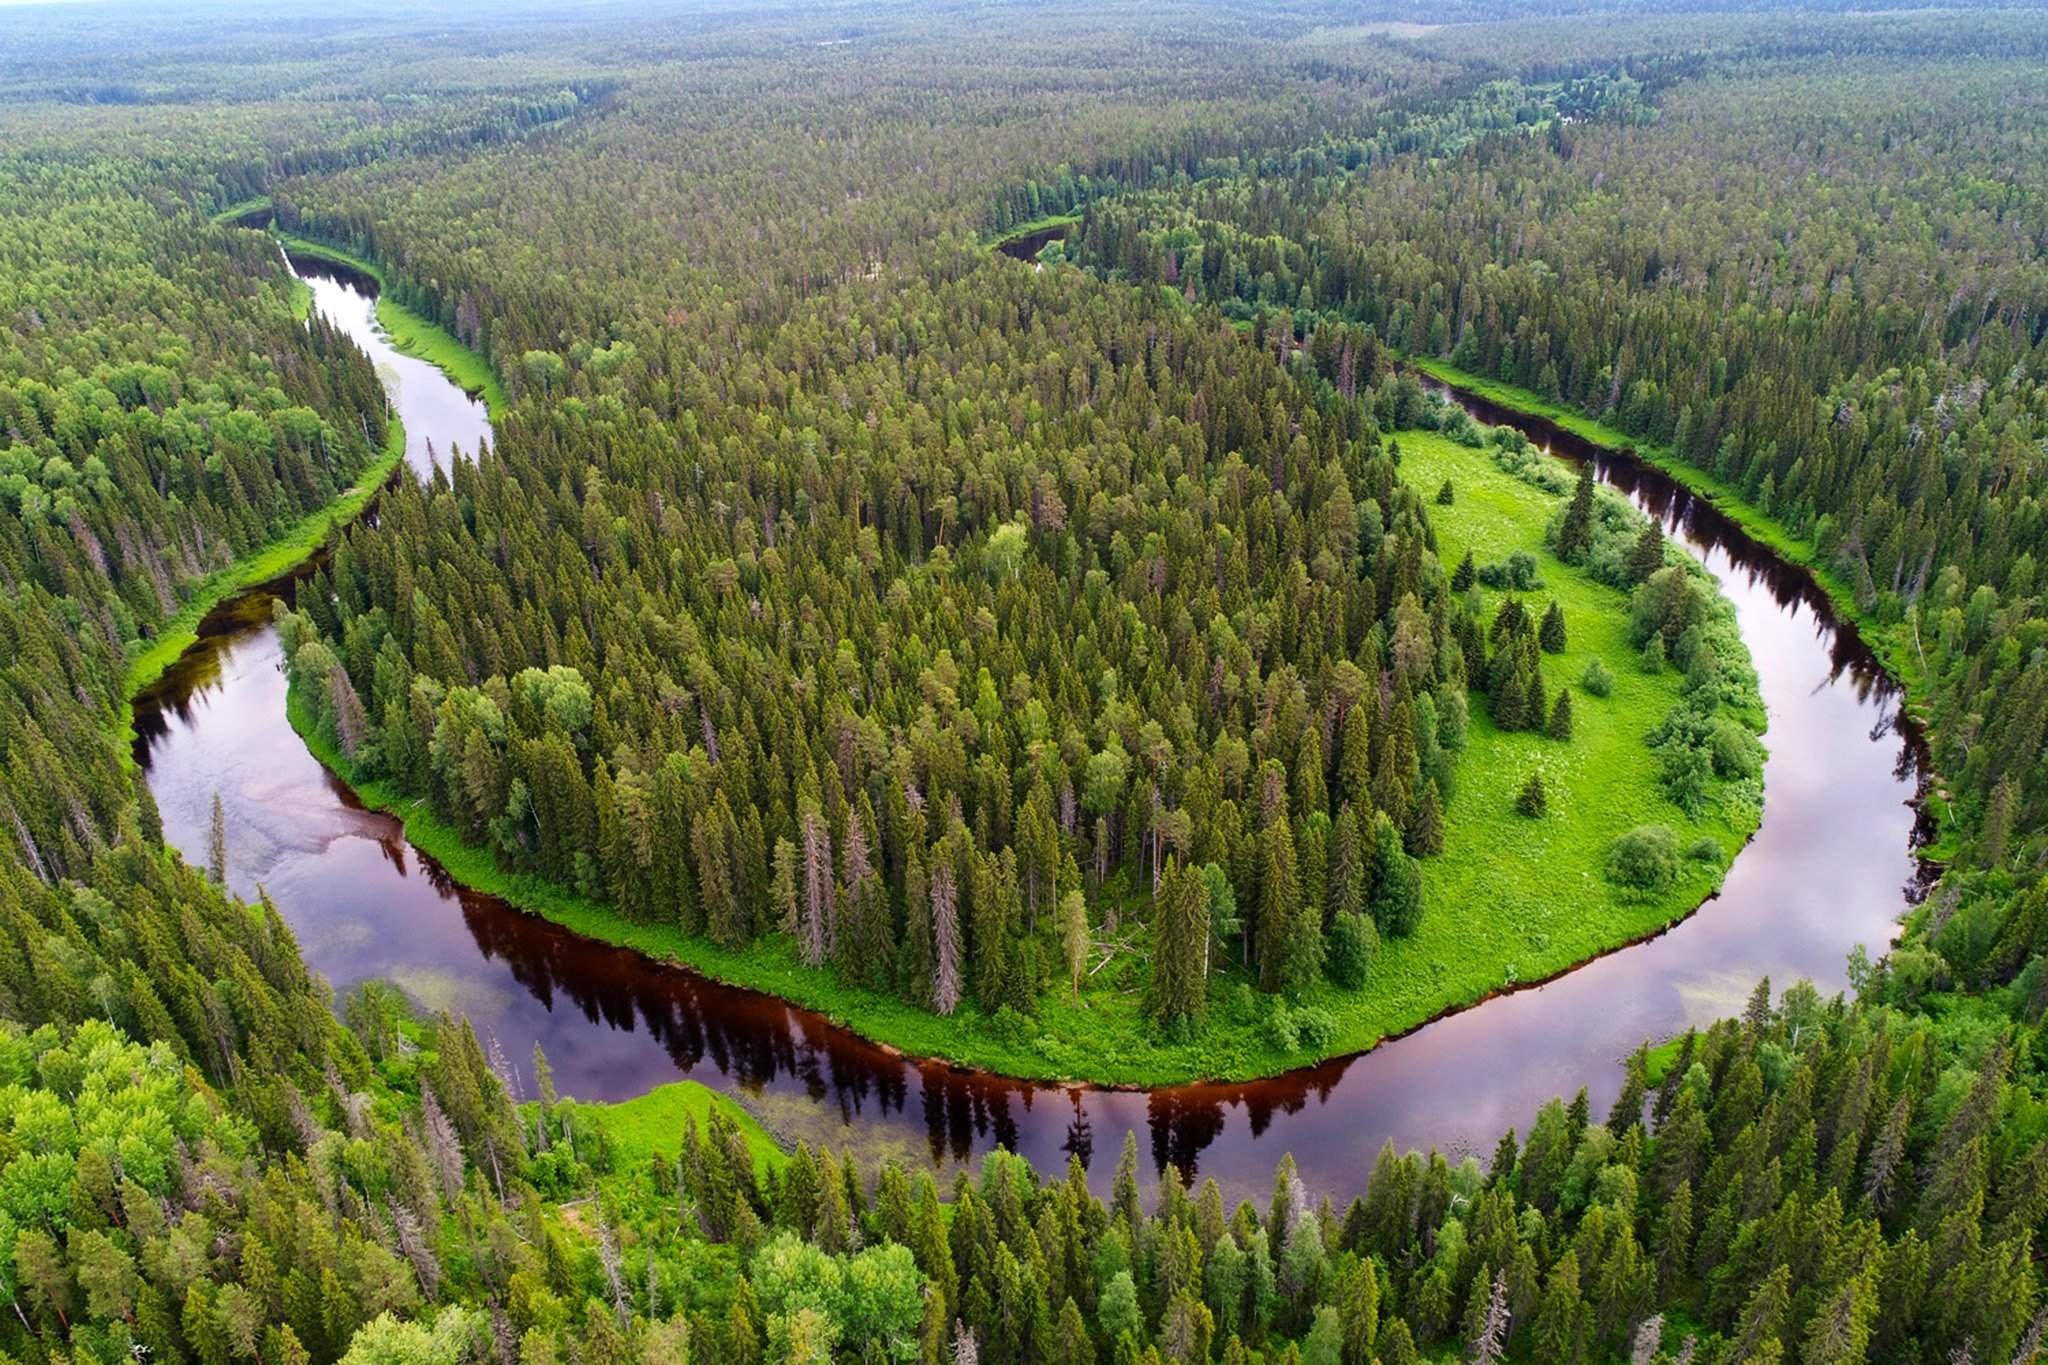 Russia is a of forests